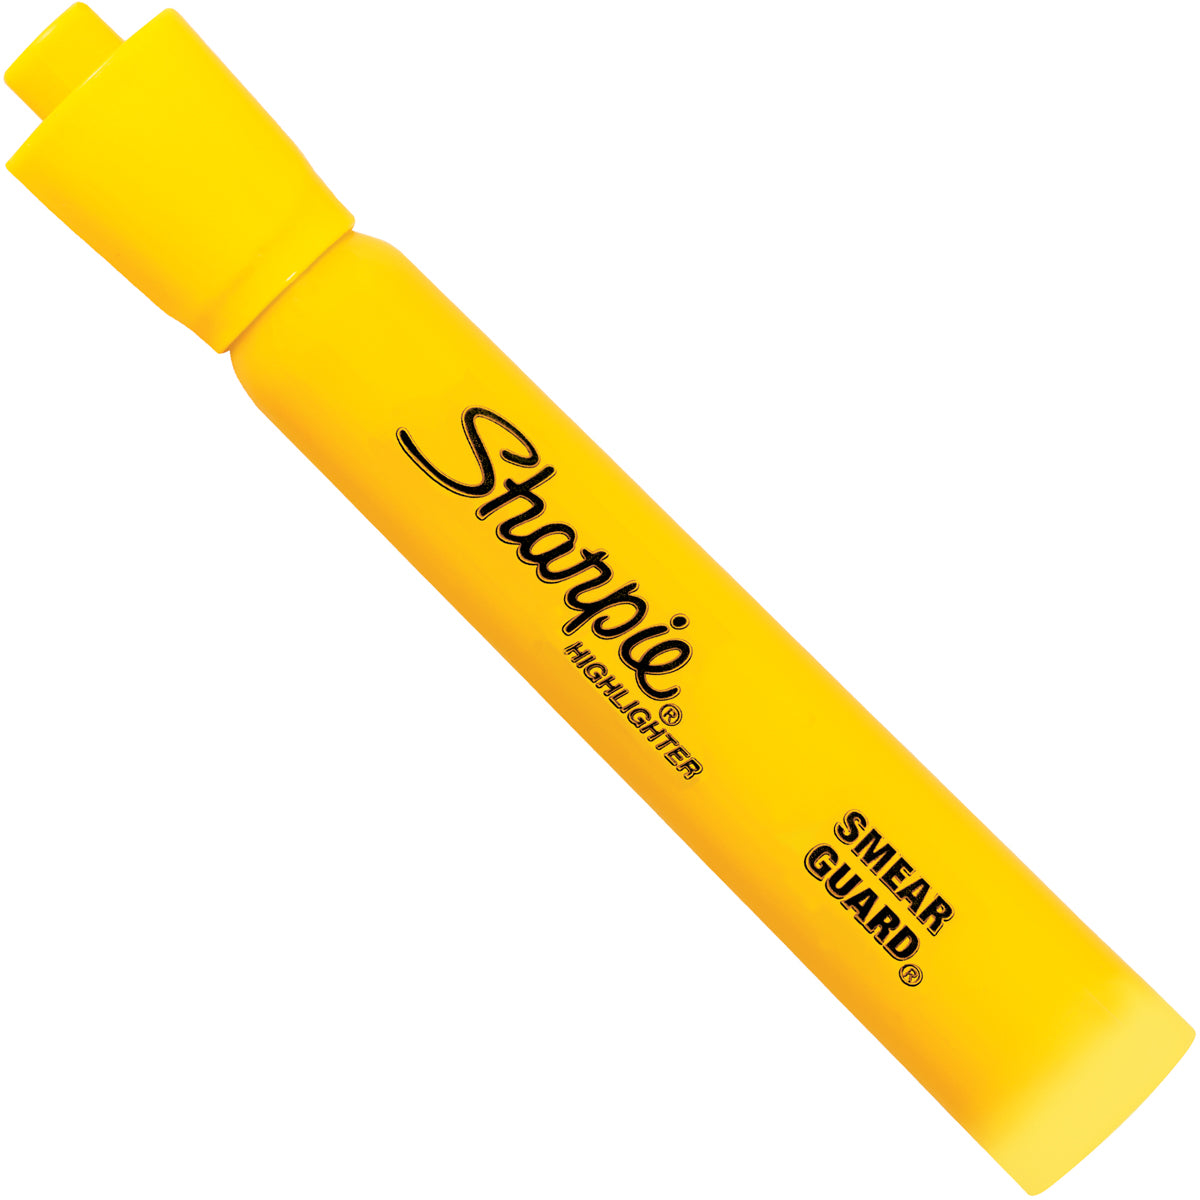 Sharpie Clear View Highlighters 2 Pack - Yellow